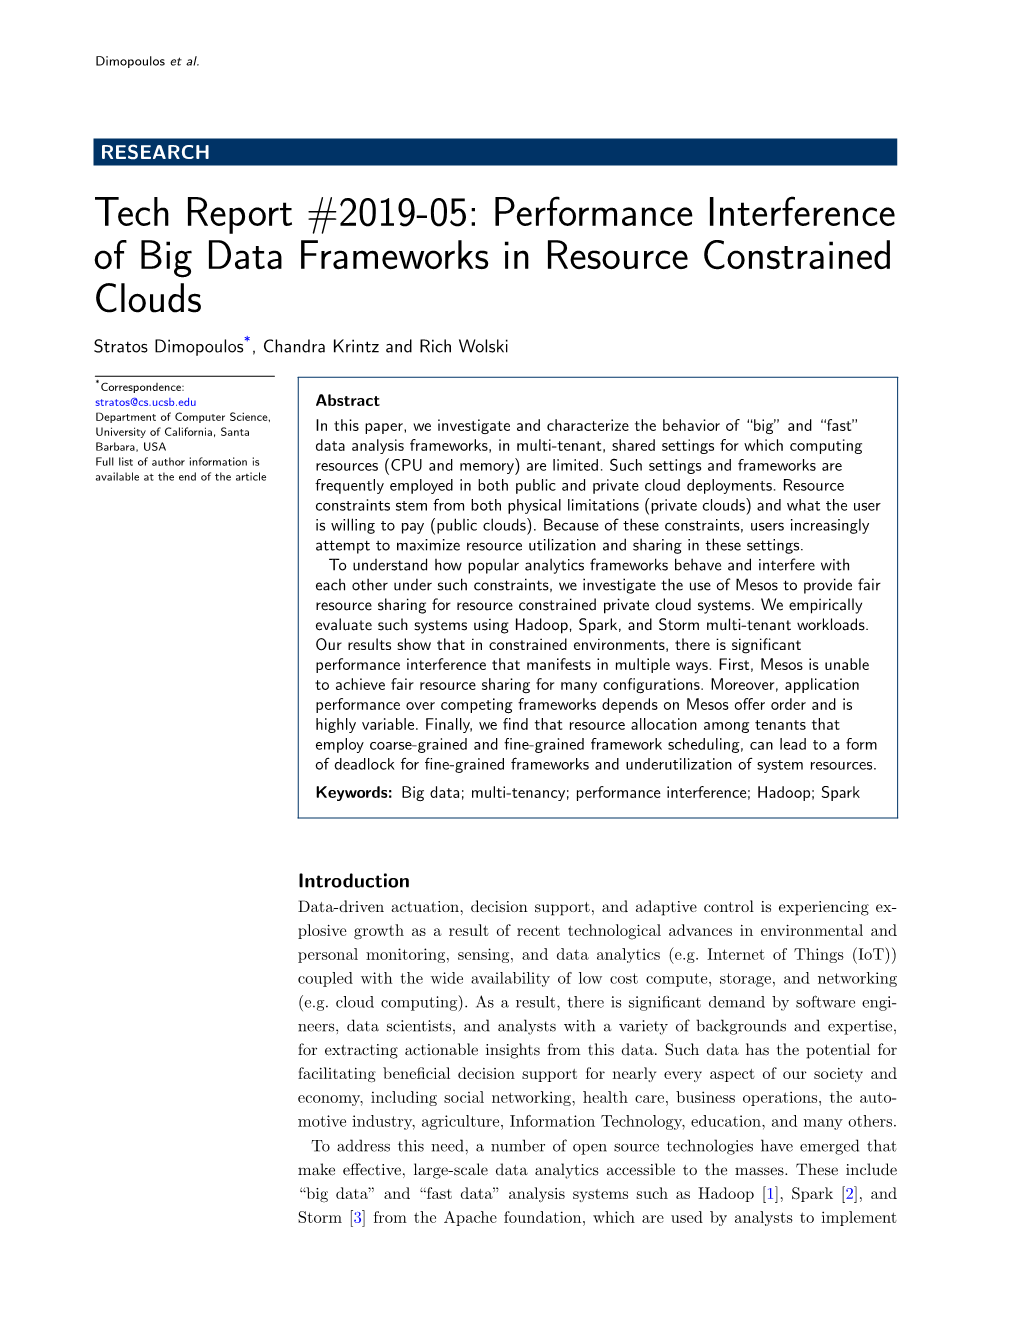 Tech Report #2019-05: Performance Interference of Big Data Frameworks in Resource Constrained Clouds Stratos Dimopoulos*, Chandra Krintz and Rich Wolski